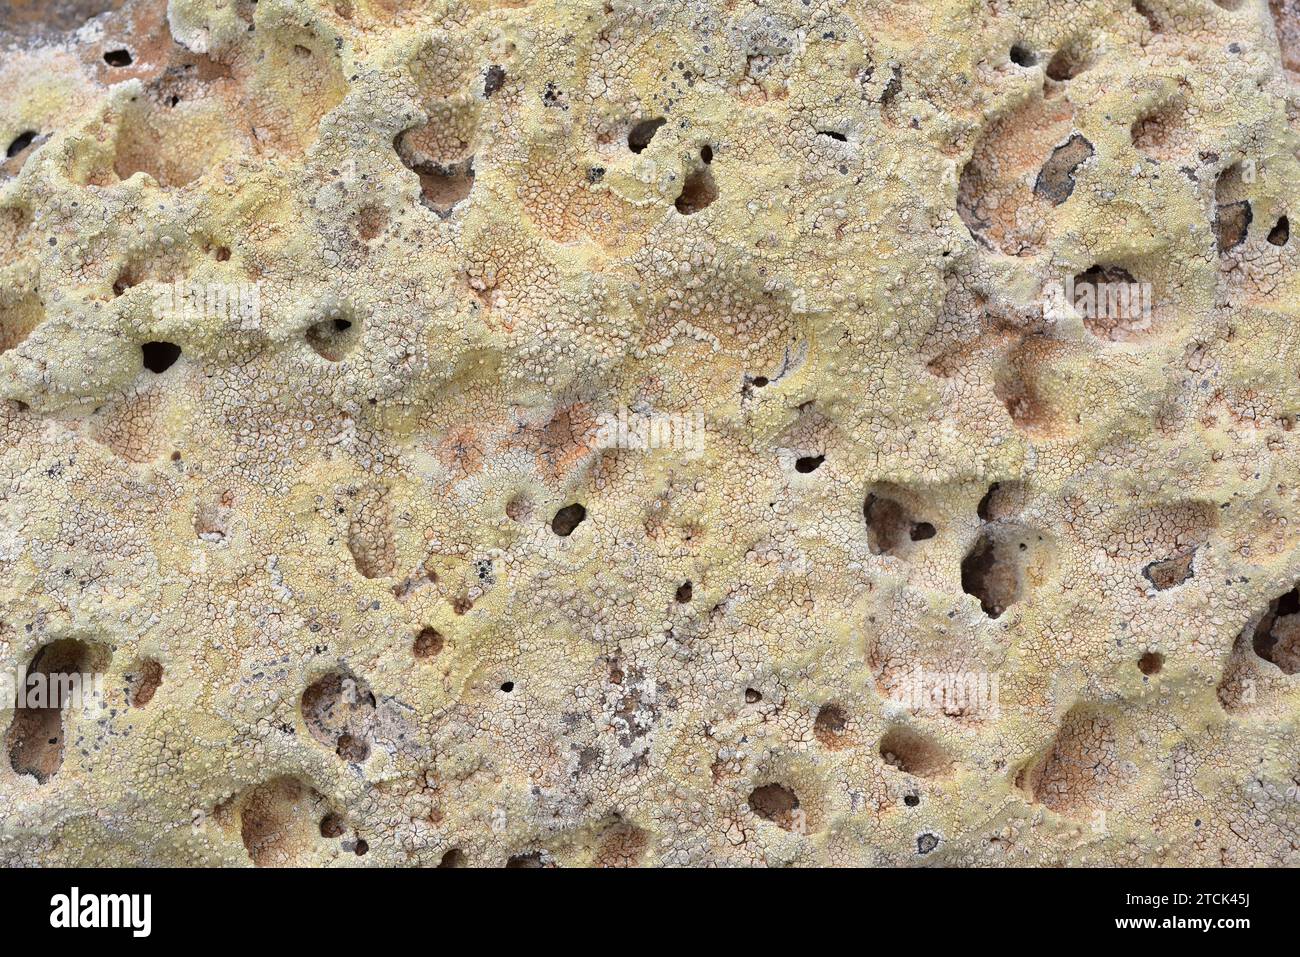 Pertusaria pluripuncta is a crustose lichen with apothecia. This photo was taken in Lanzarote Island, Canary Islands, Spain. Stock Photo